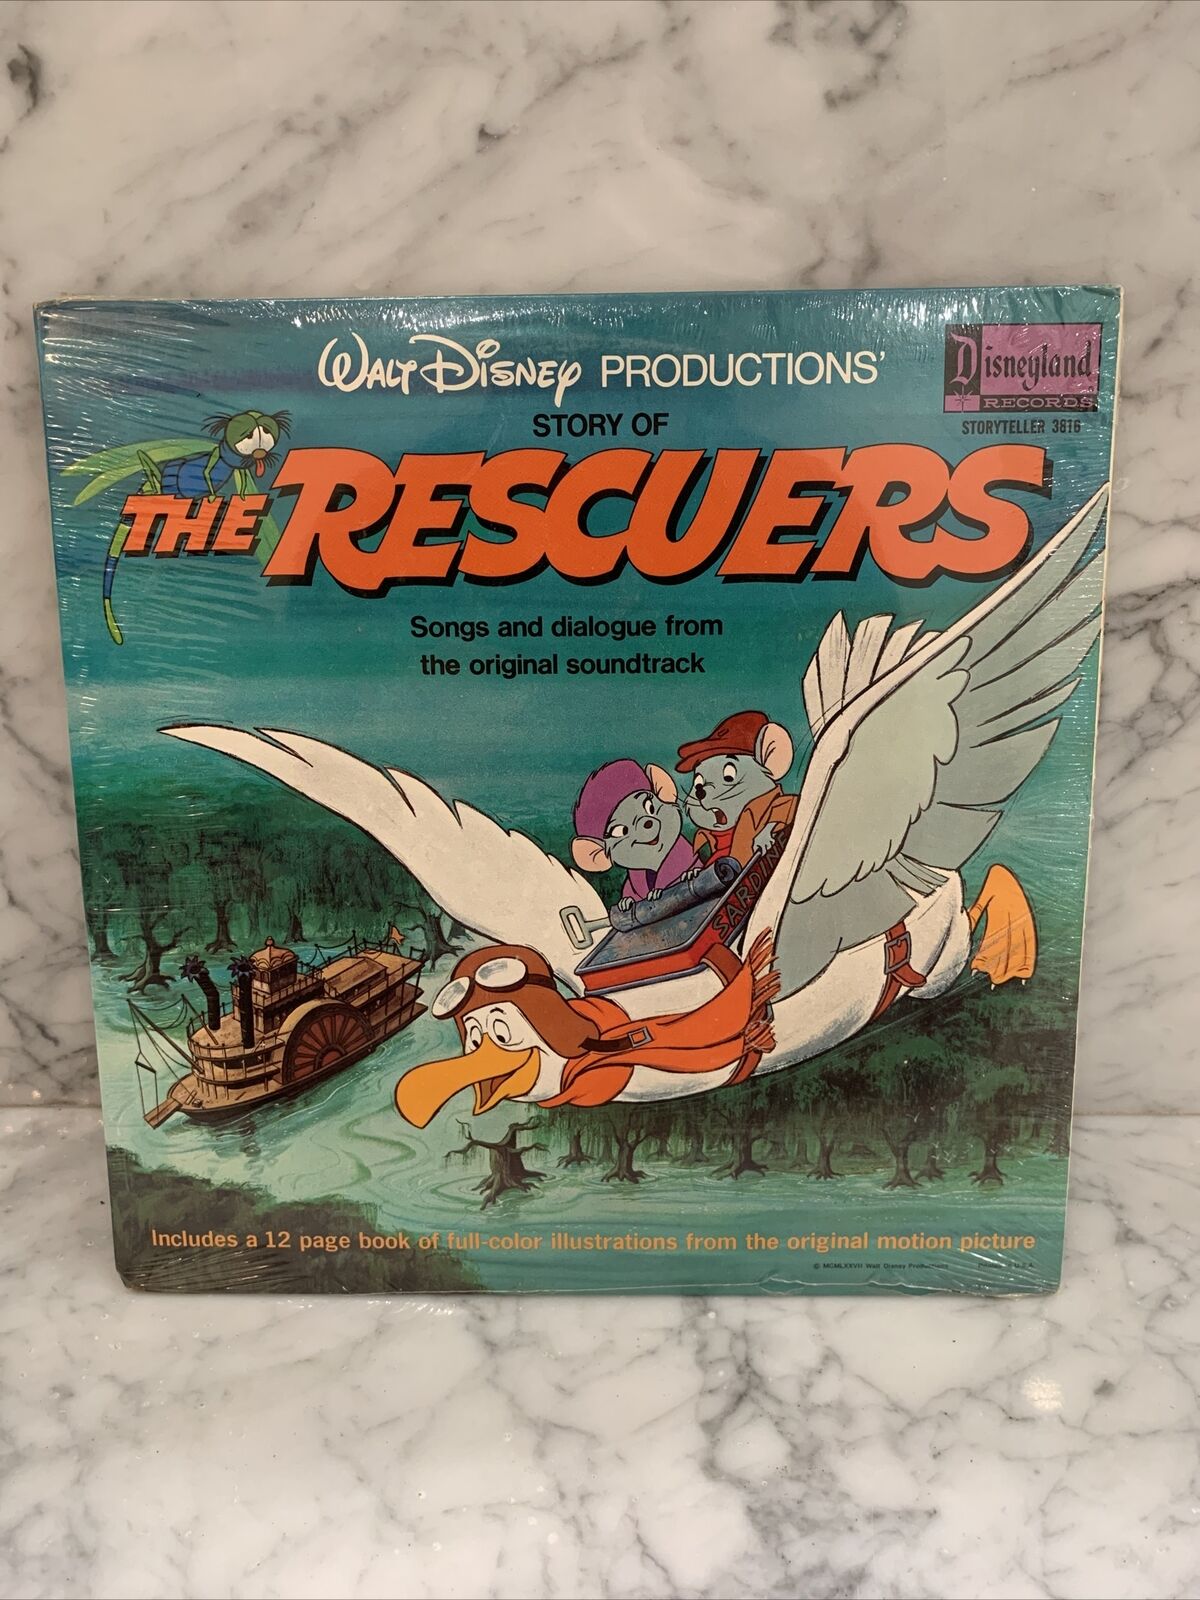 1977 Vintage Walt Disney Productions Story of the Rescuers Book Album NEW